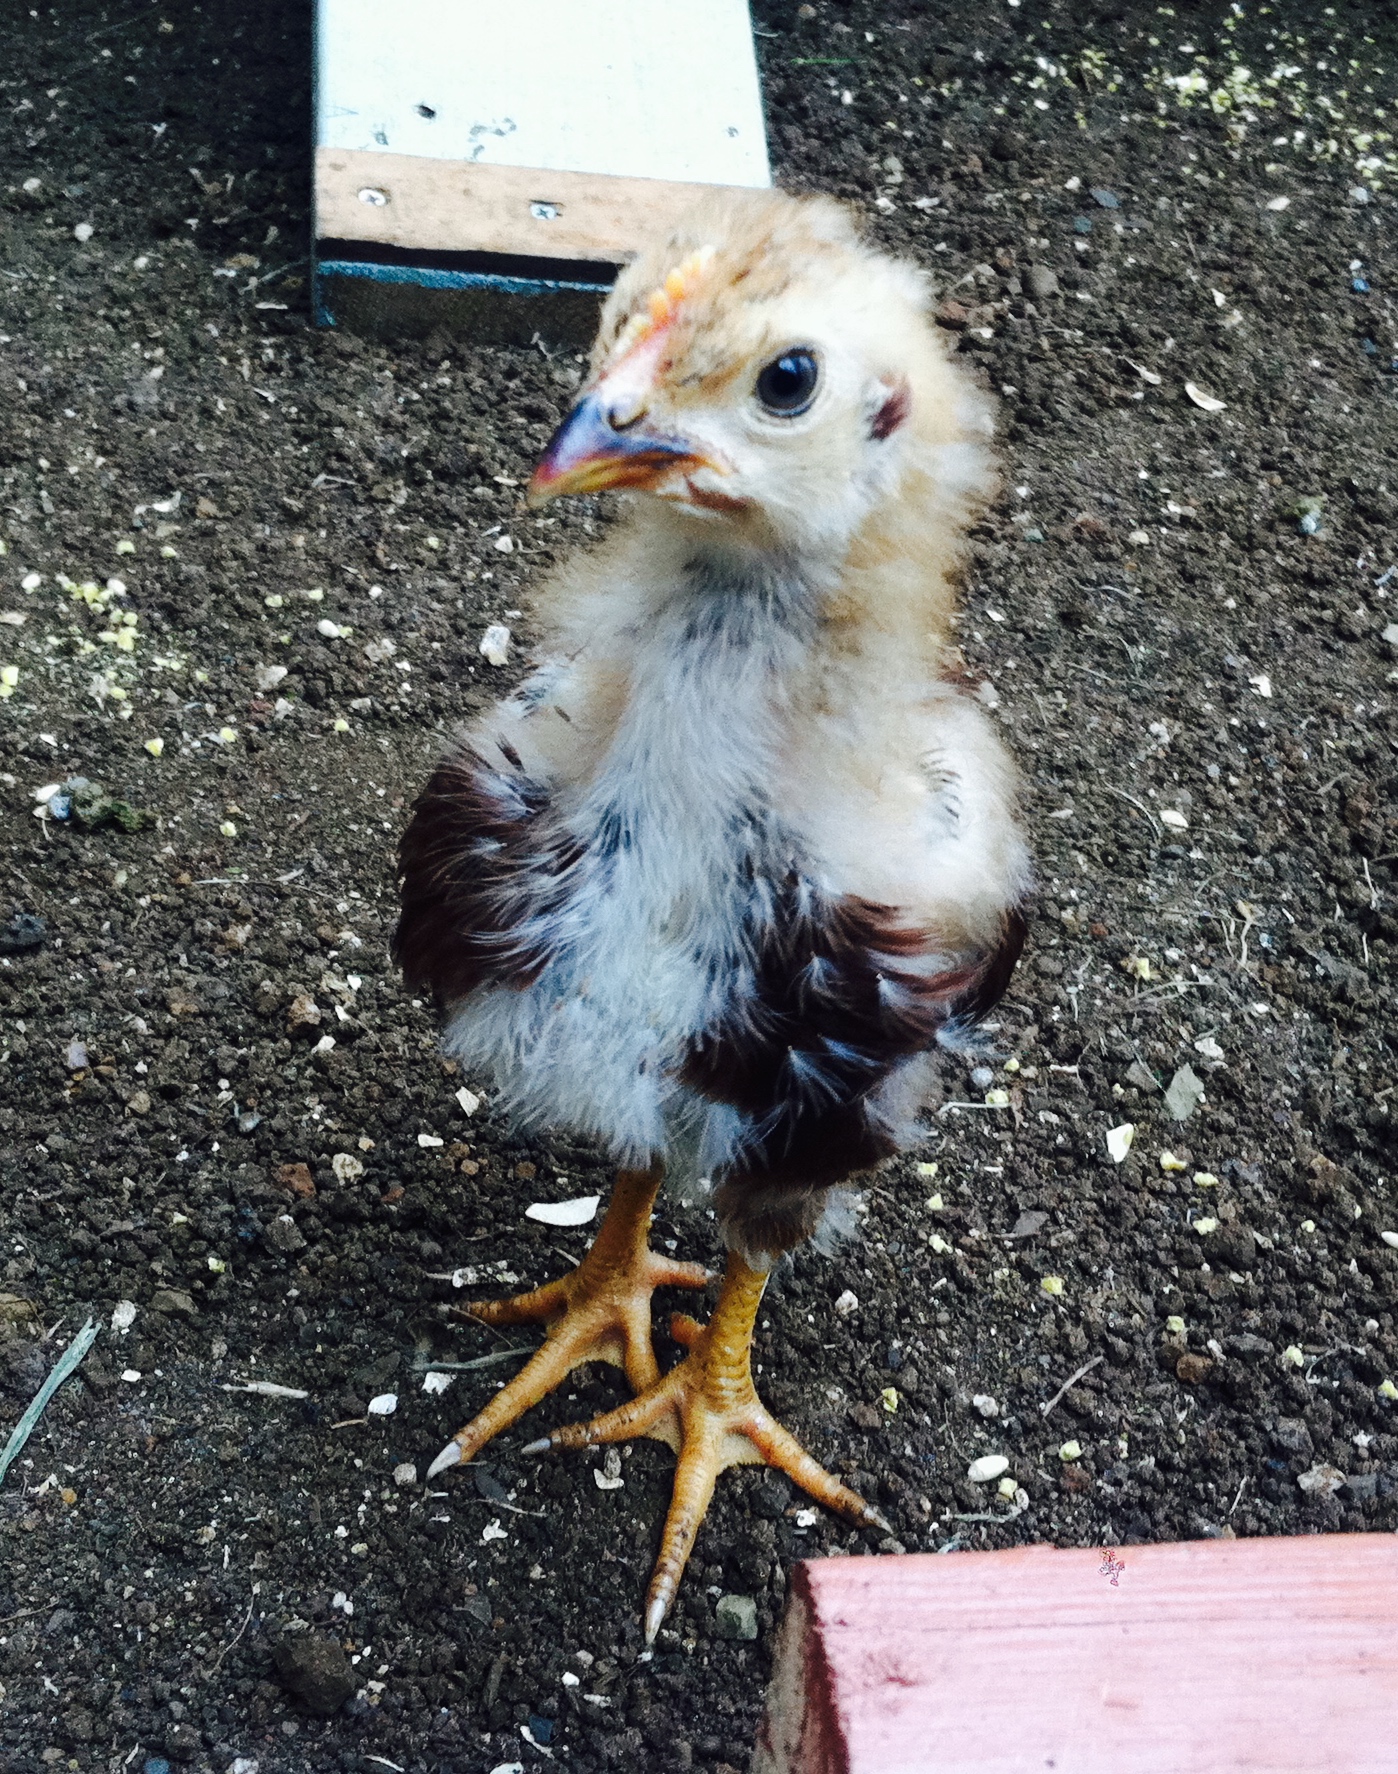 rhode island red rooster- about 1 month. "smoov-e"